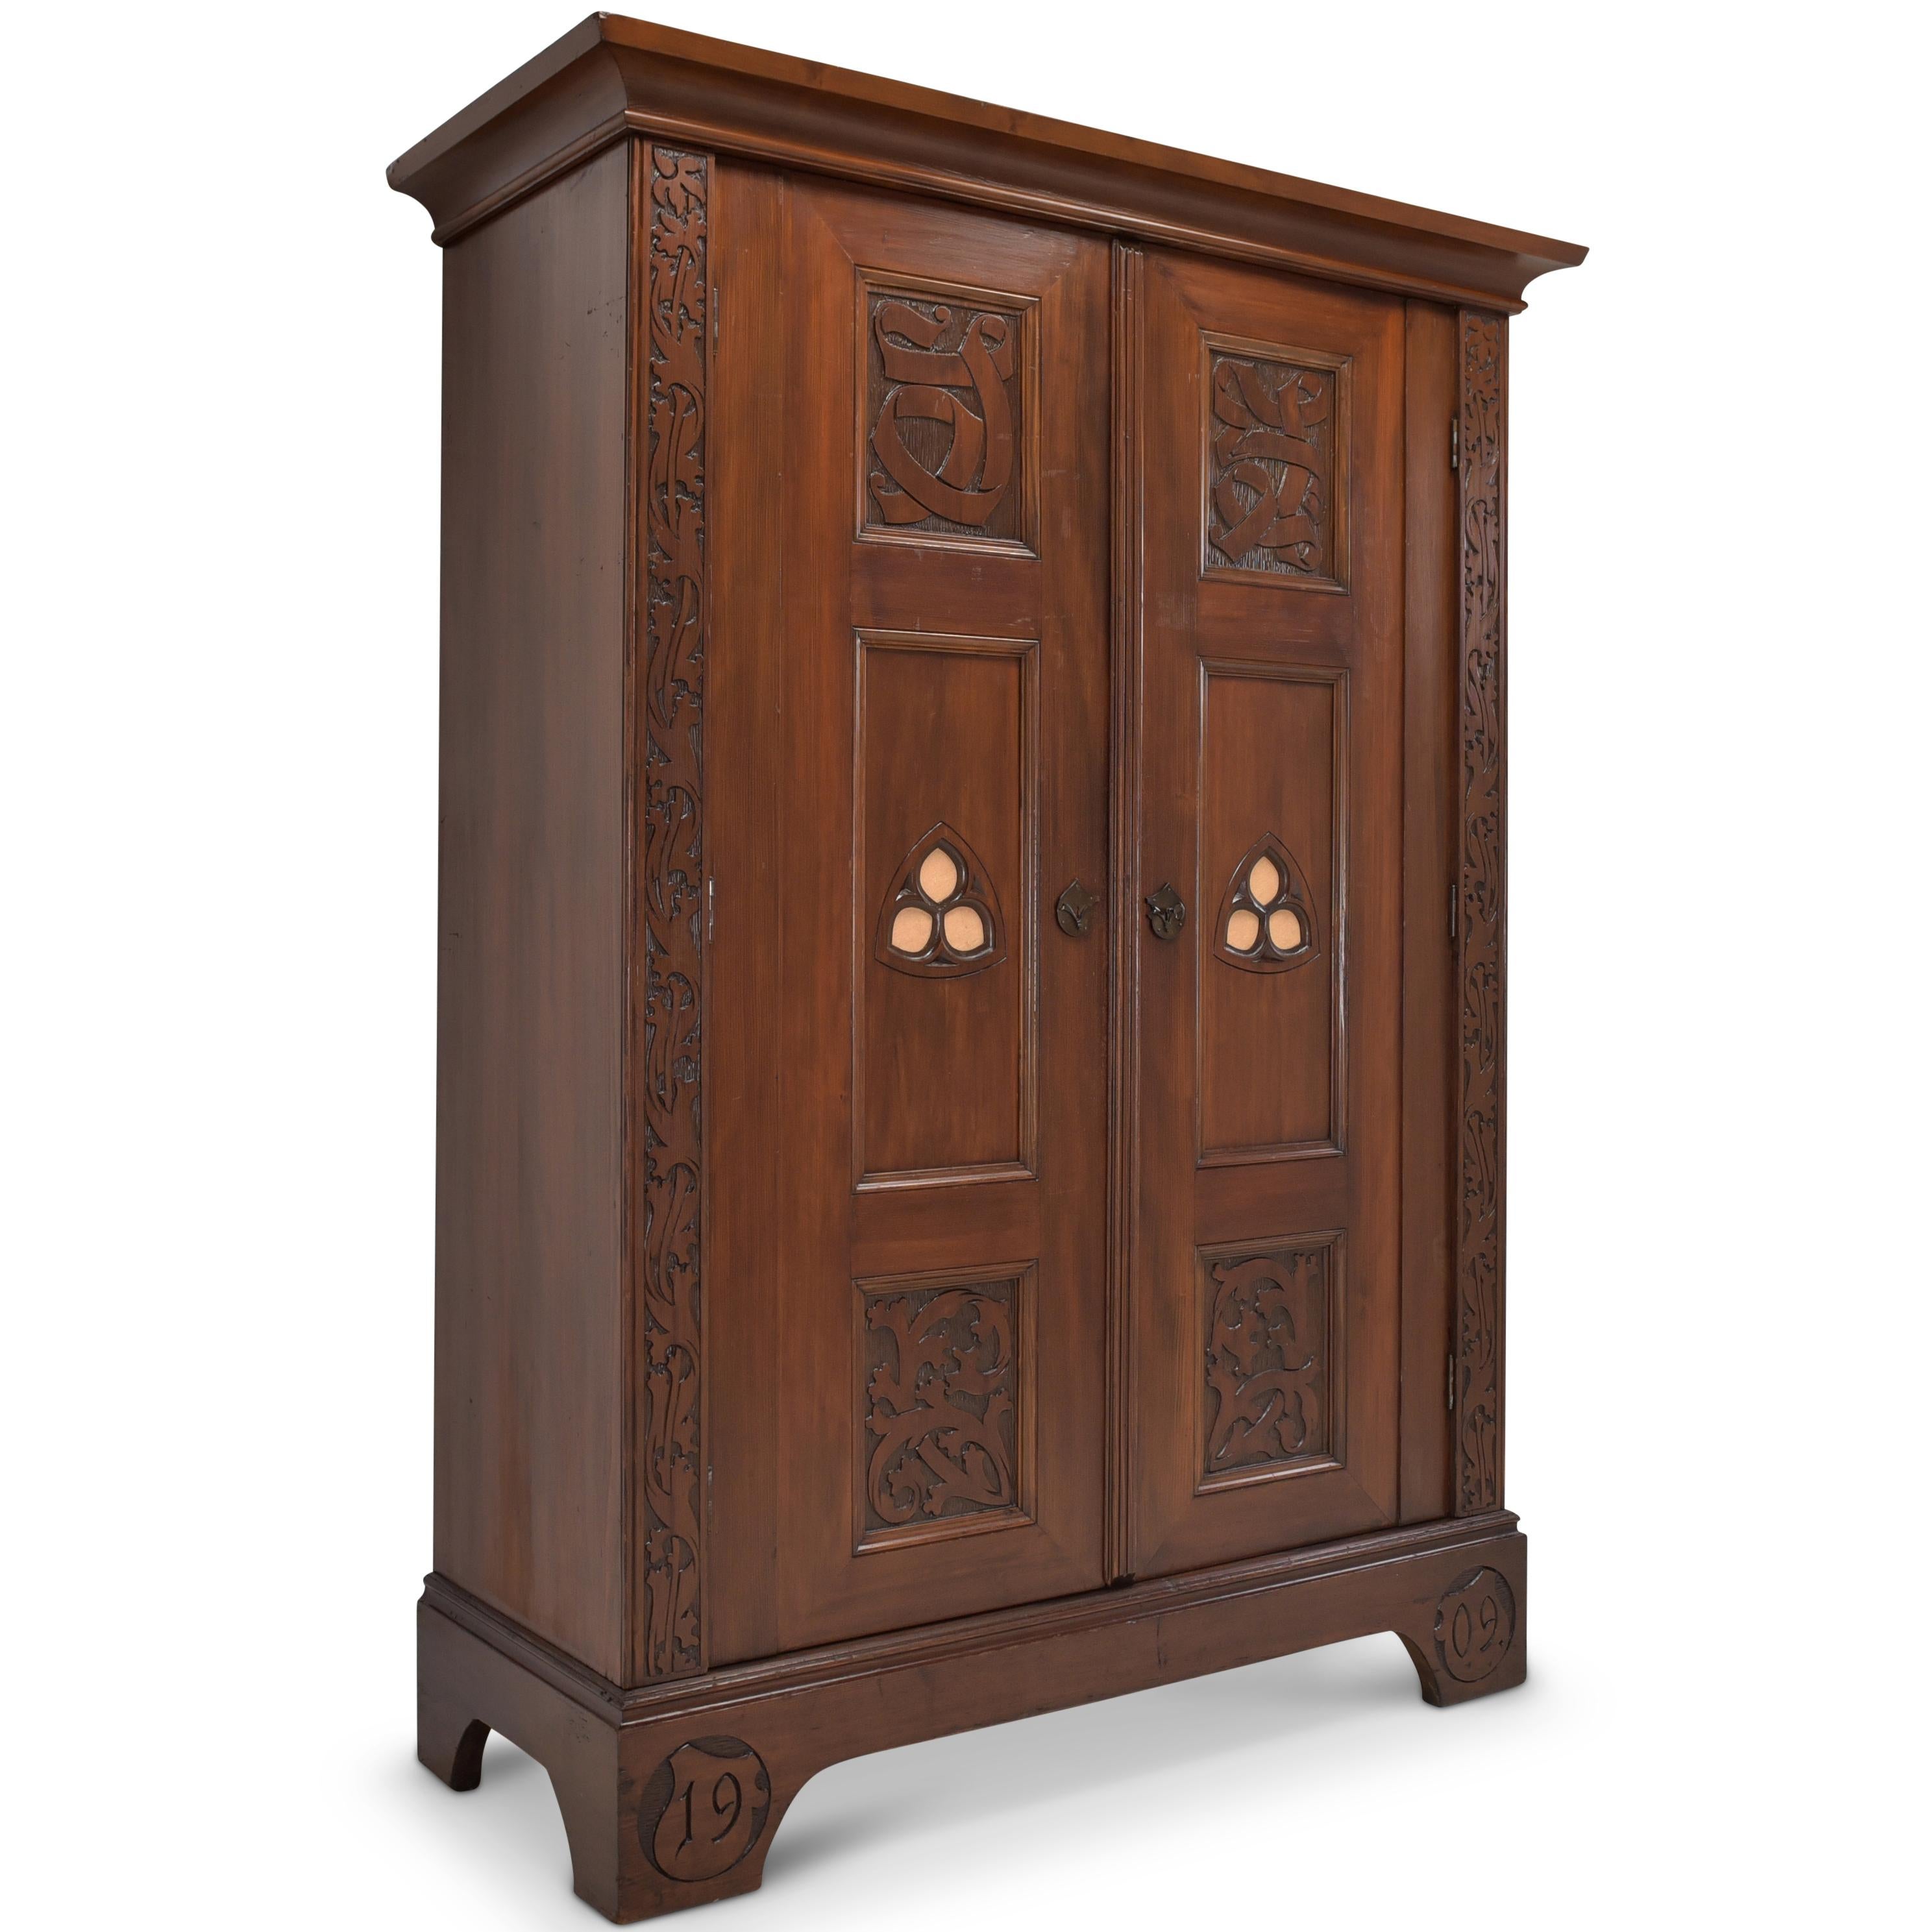 Hallway cupboard restored Art Nouveau Gothic 1909 in the style of v. Riemerschmid

Features:
Two-door model with divided interior and clothes rail
High quality
Heavy quality
Beautiful carved decor
Original bar lock
Original